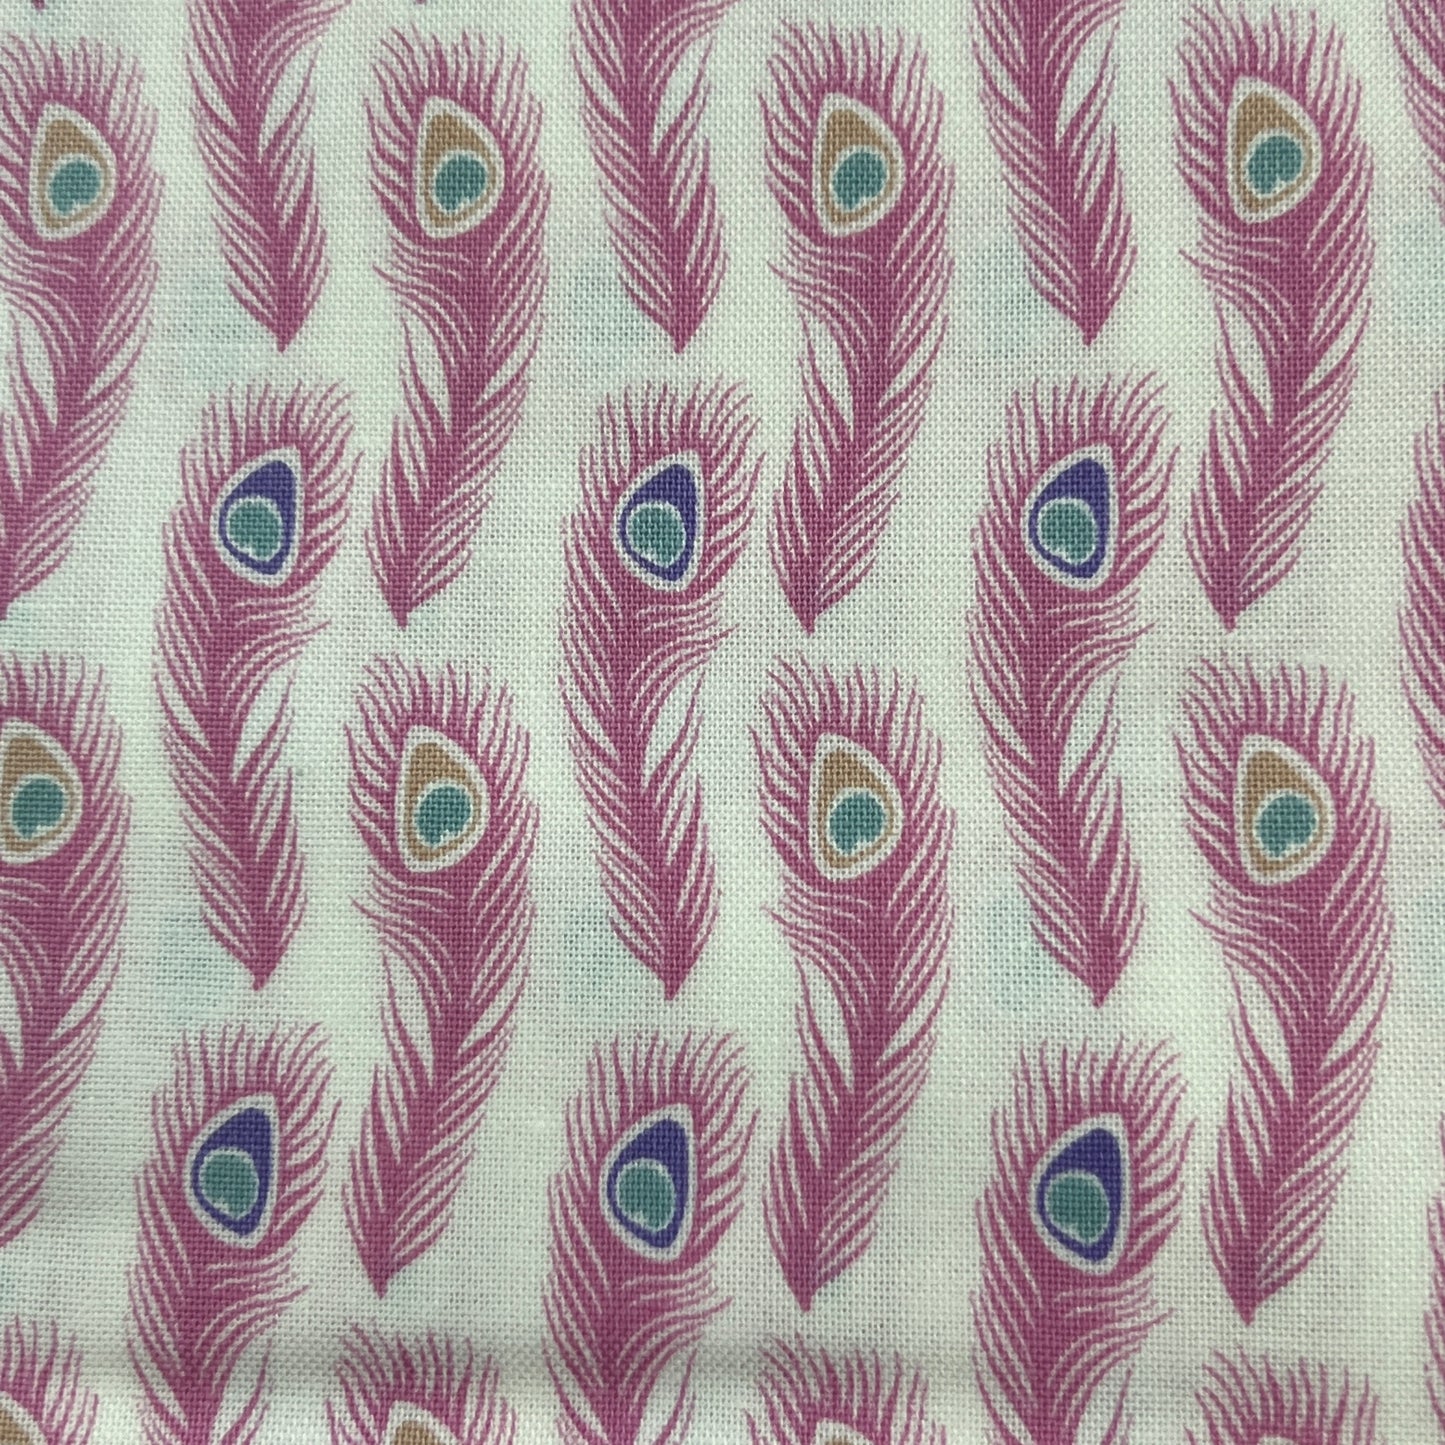 Sarah Payne Elegant Peacock Cotton Prints By The Metre (112cm Wide) - Peacock Feathers Pink